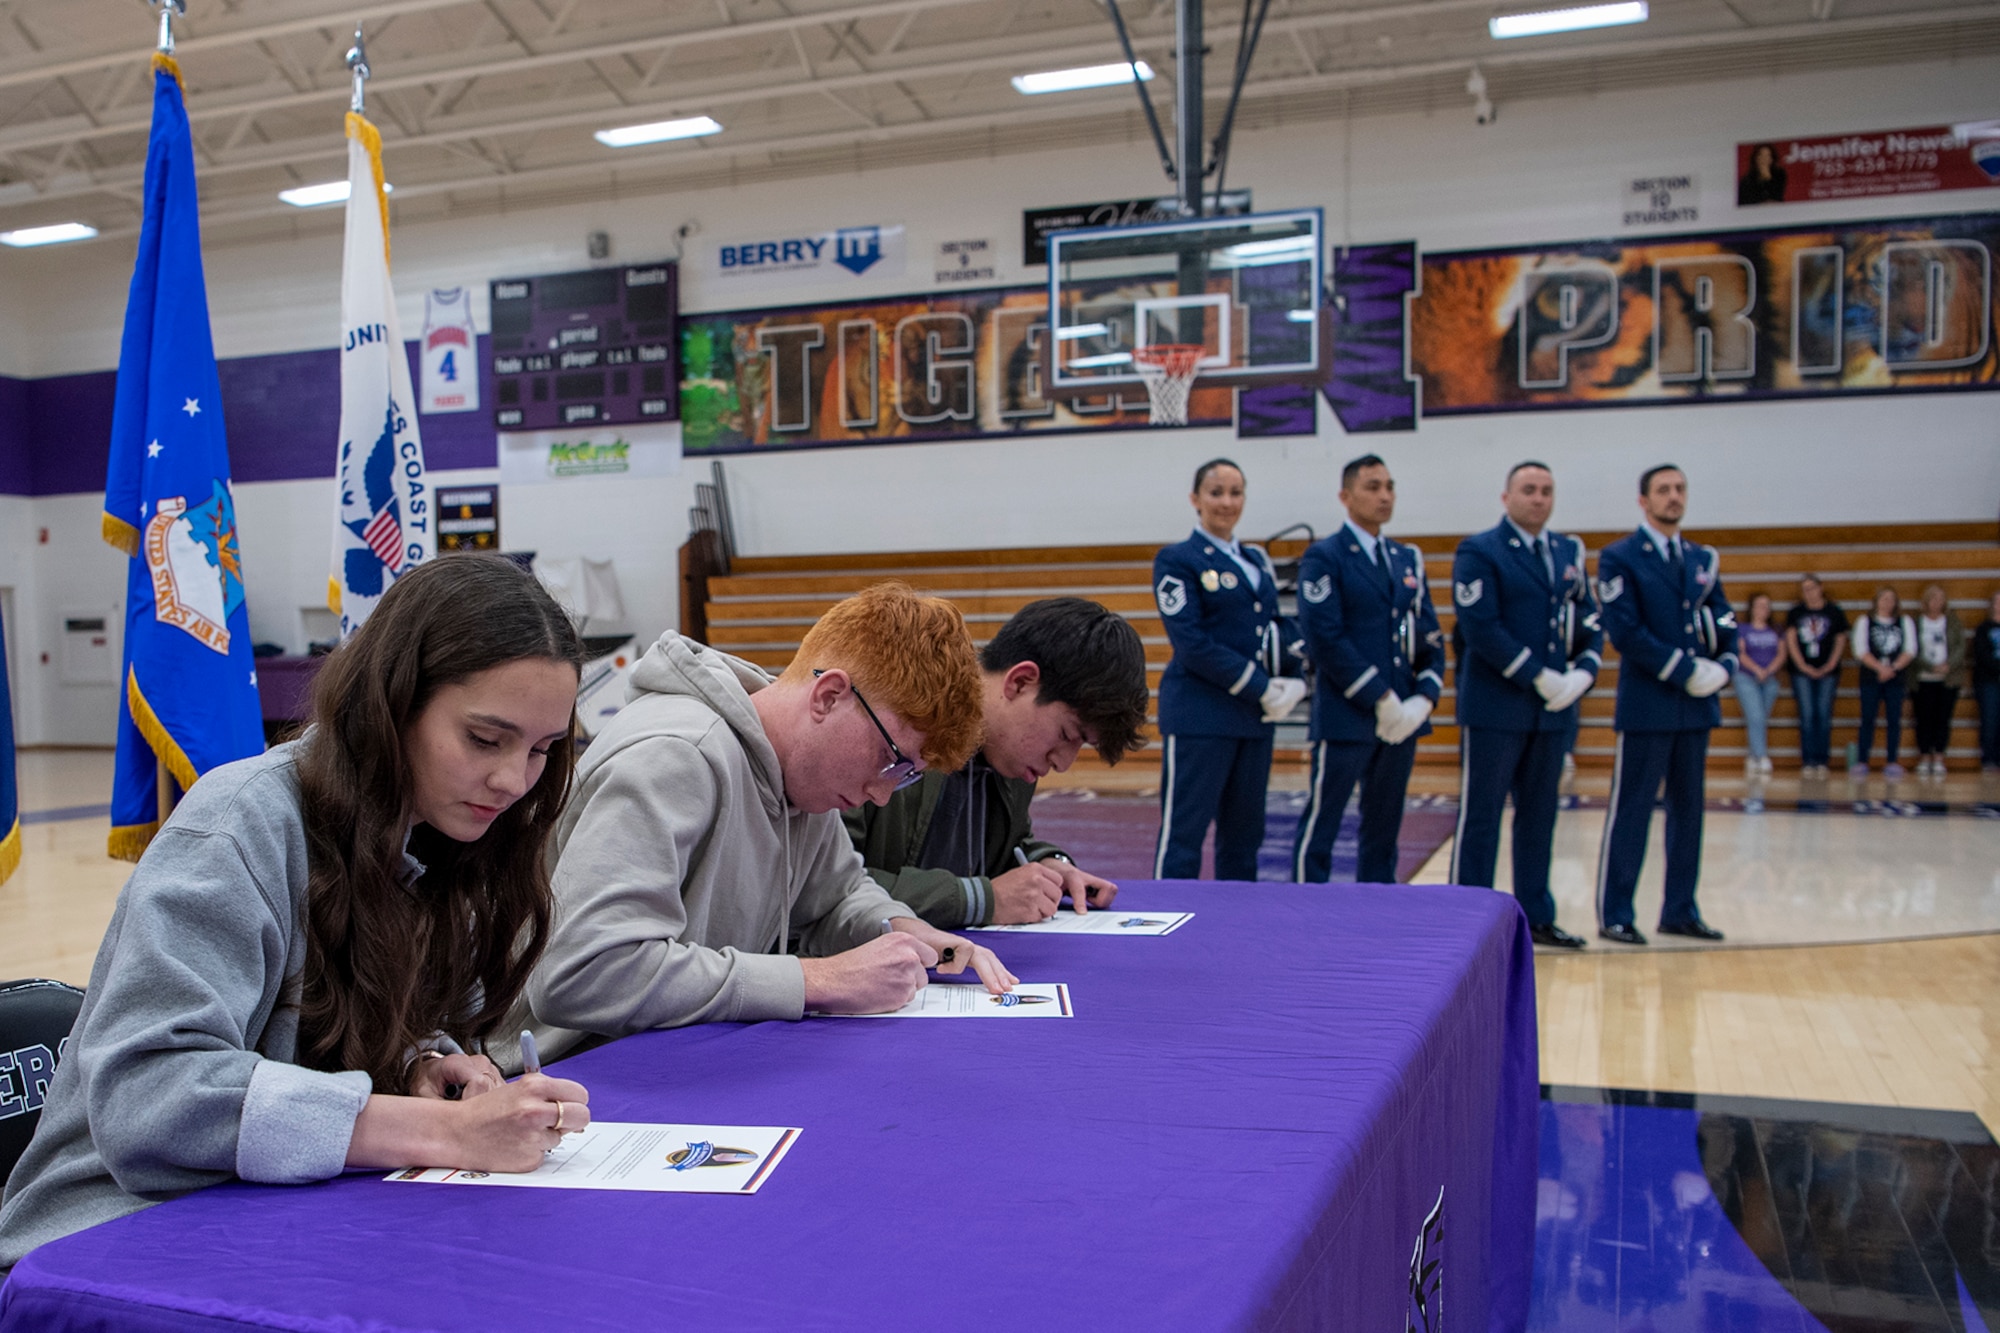 Students from Northwestern High School in Kokomo sign certificates of intent to join the military. Schools from both Peru and Kokomo held events to recognize the next generation of citizen warriors. (U.S. Air Force photo/TSgt. Jami Lancette)